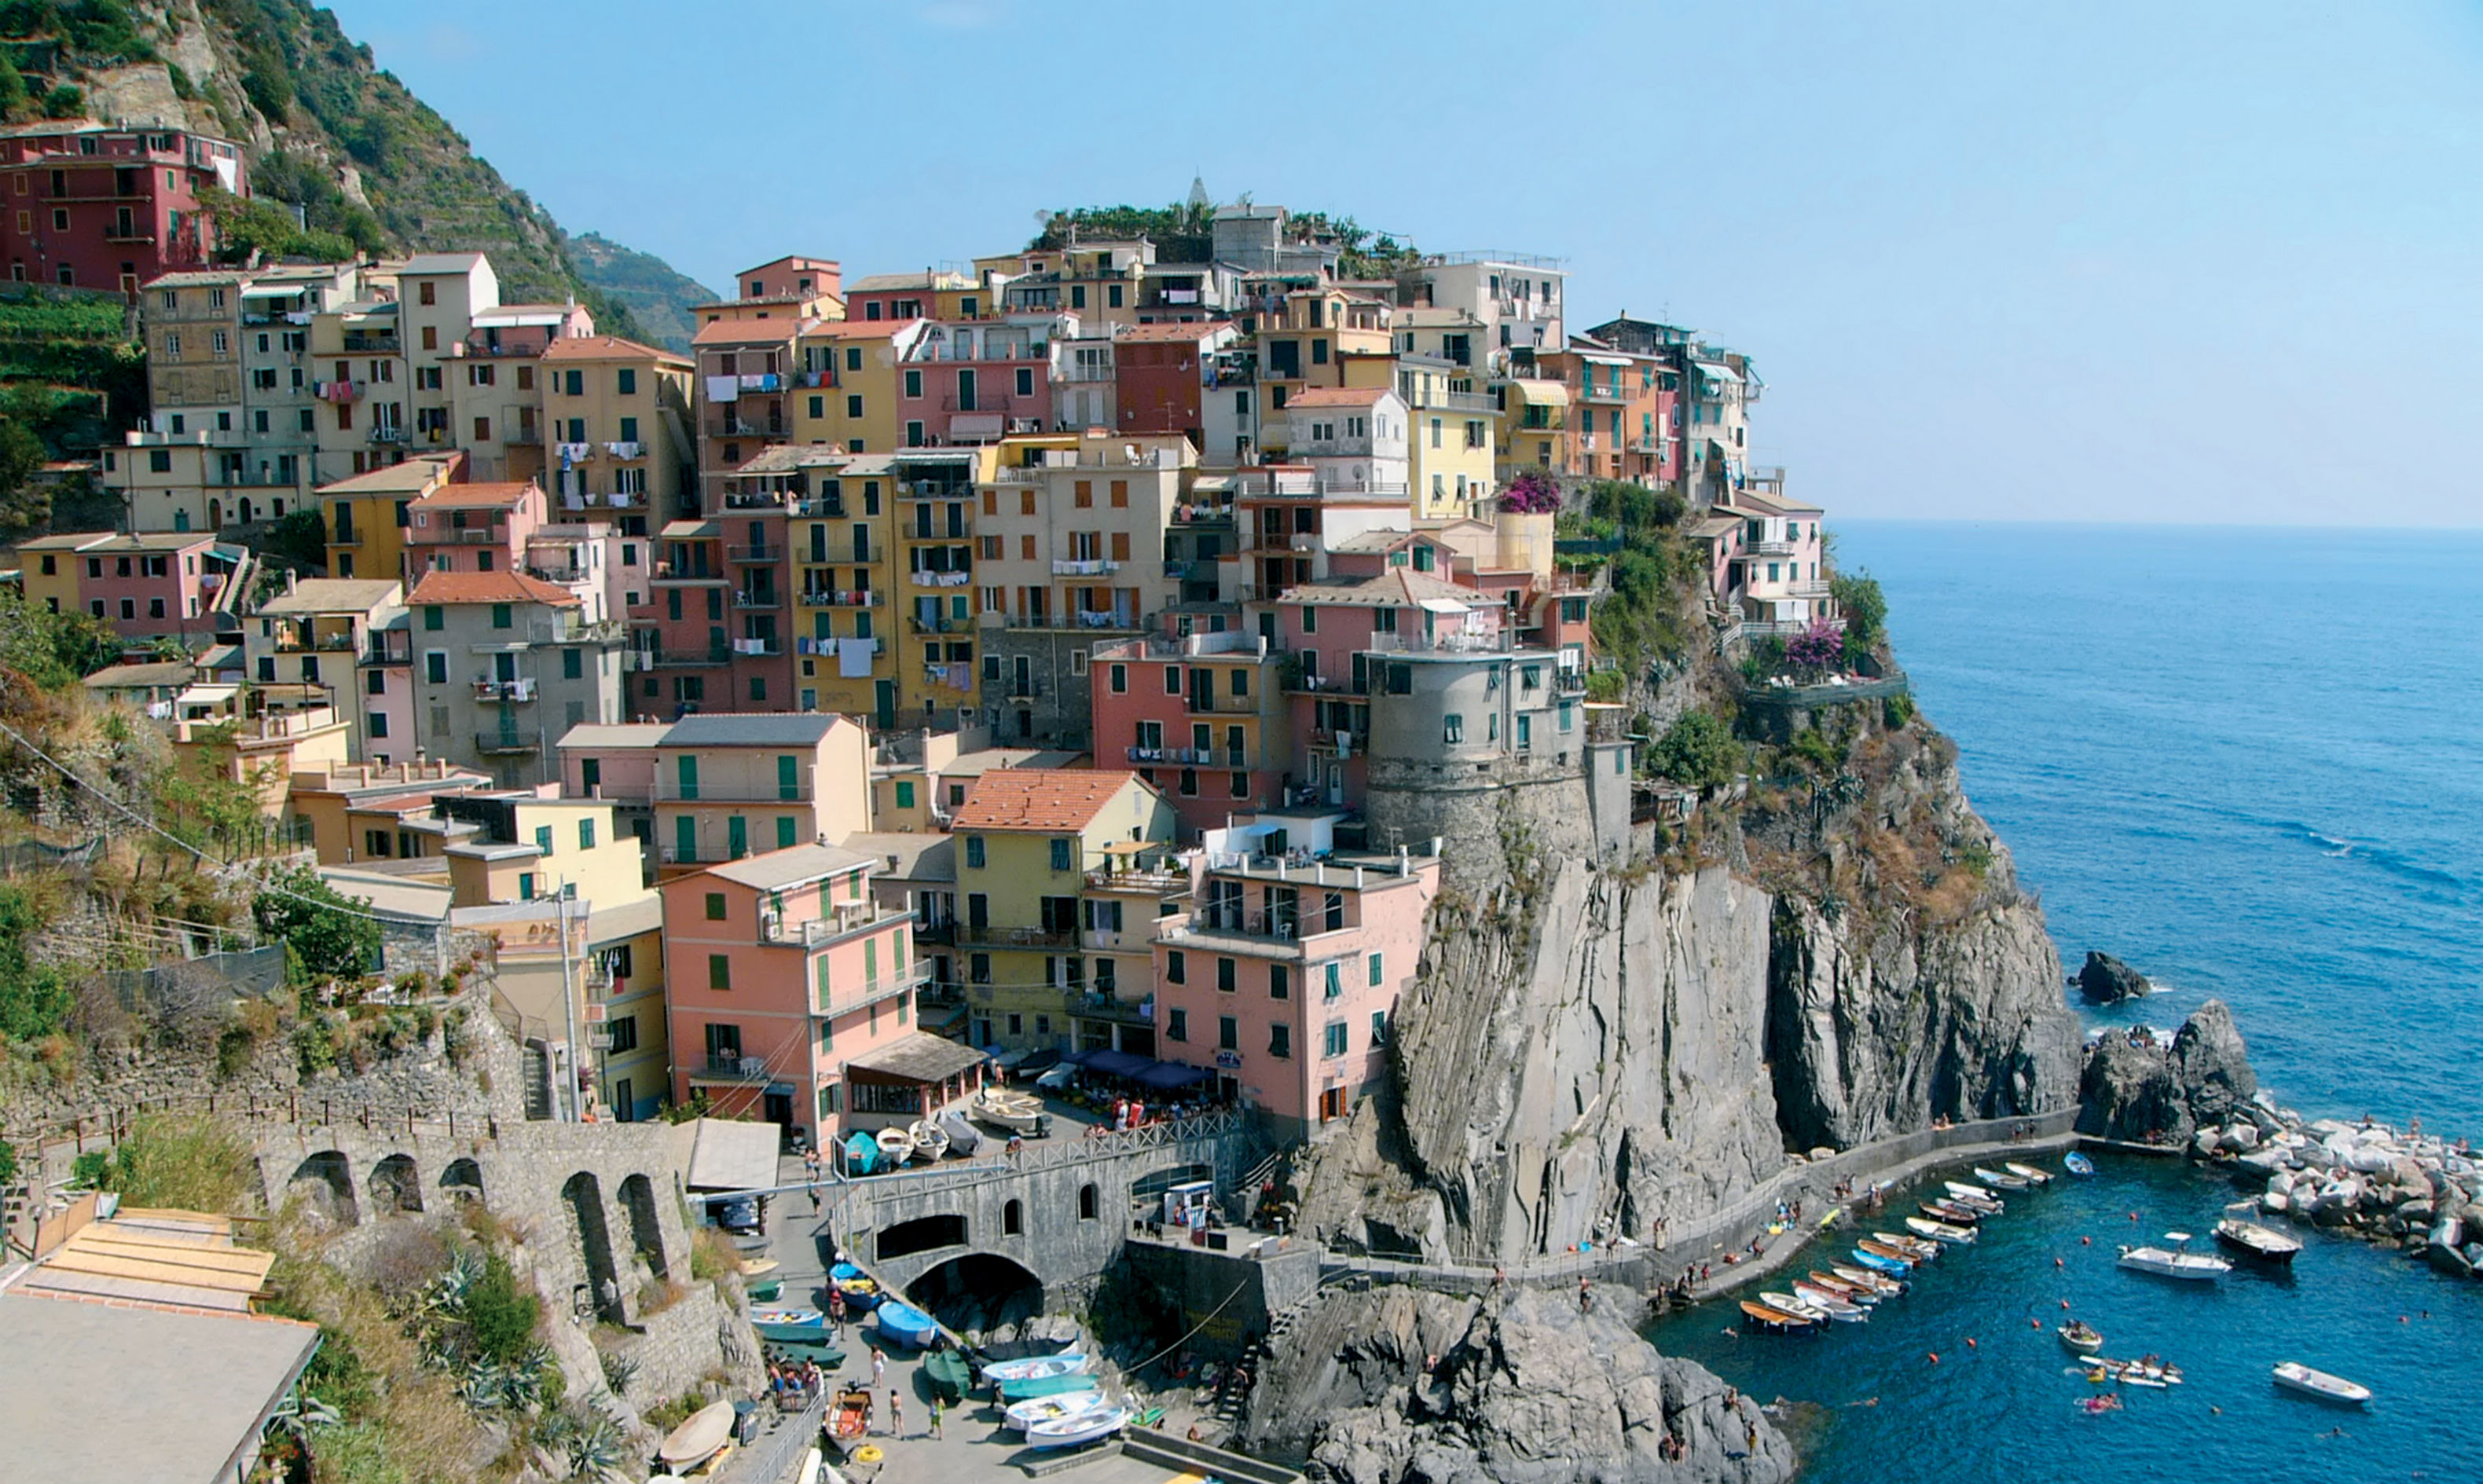 Cinque Terre, Italy - stunning coastal view with colorful buildings nestled in the cliffs.